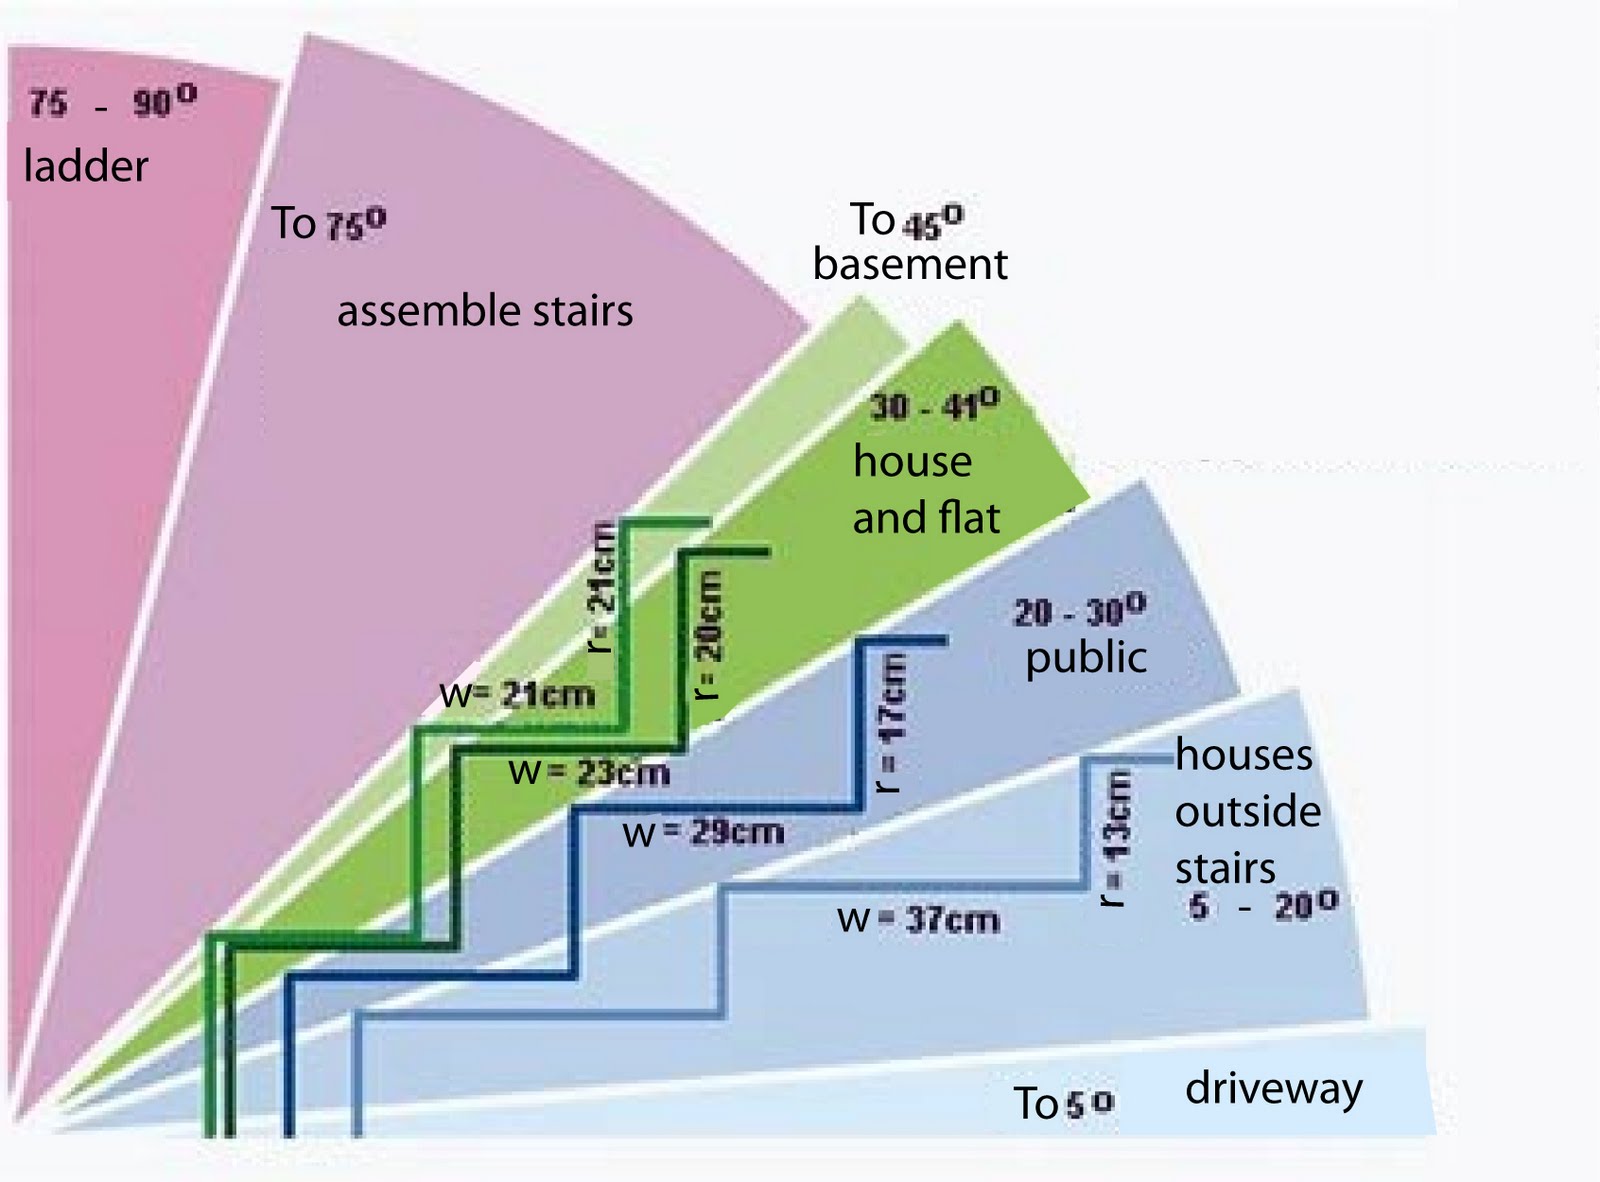 K.W Building Regulations, Stairs Basic dimensions